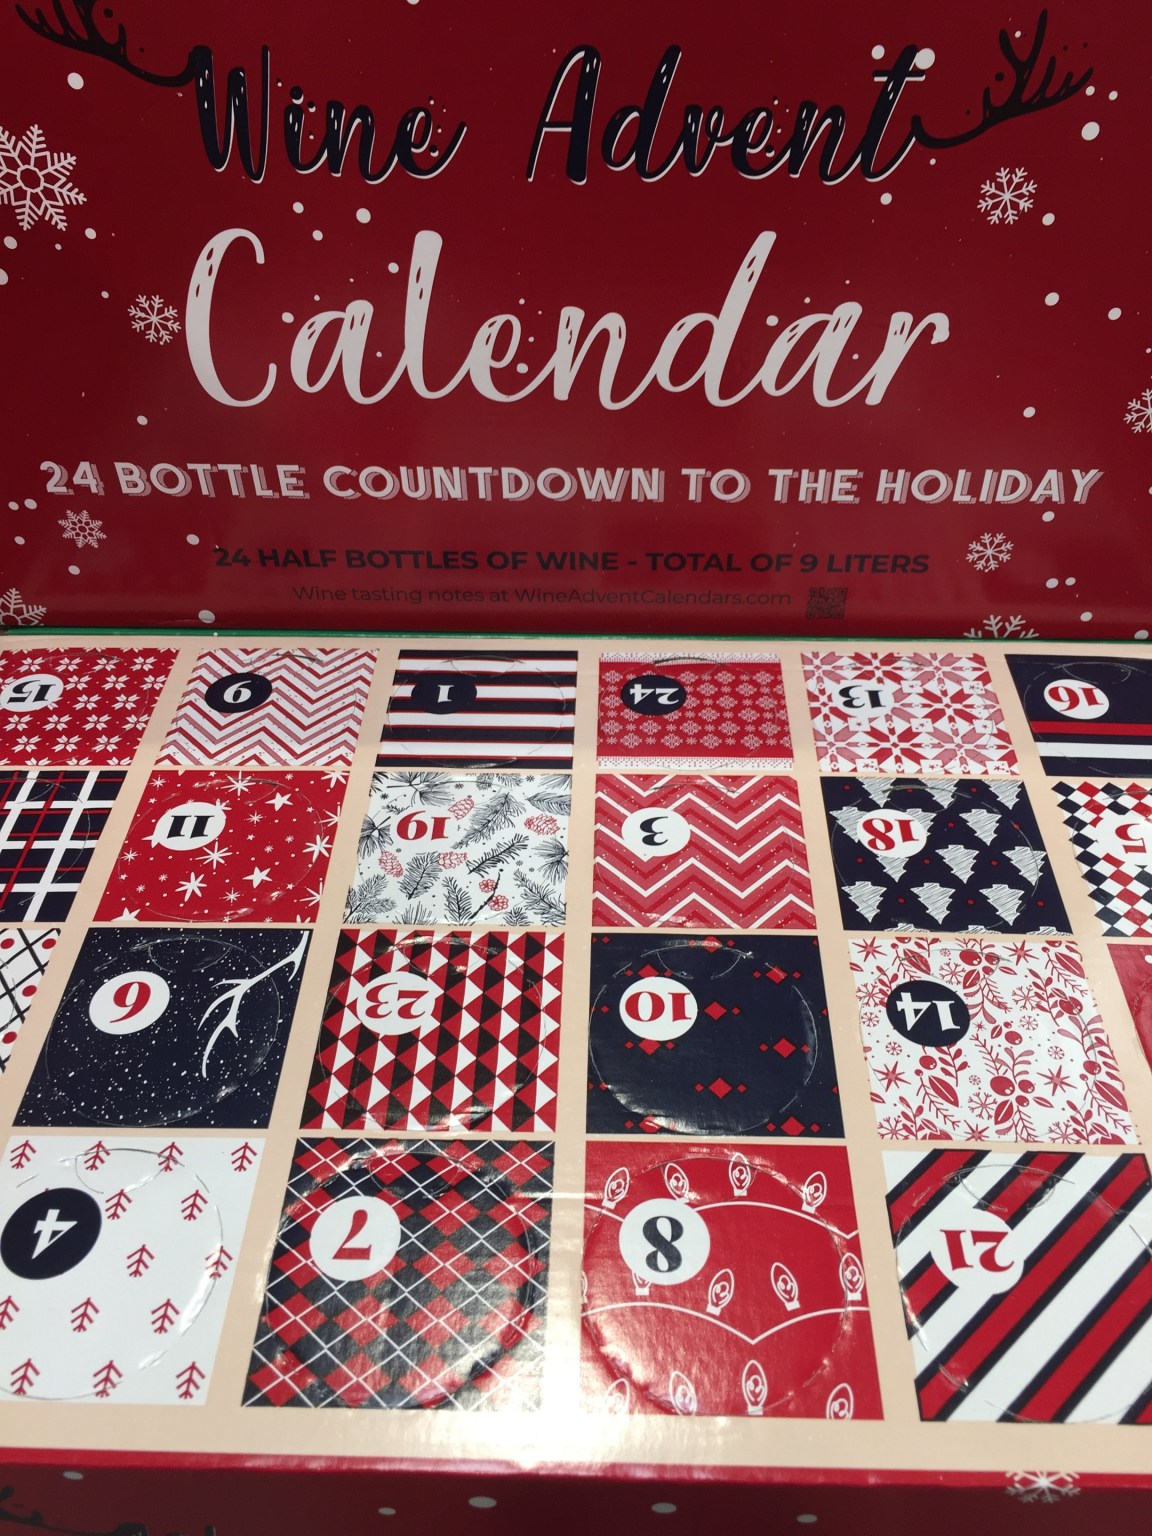 Costco s Wine Advent Calendar Comes but Once a Year Go